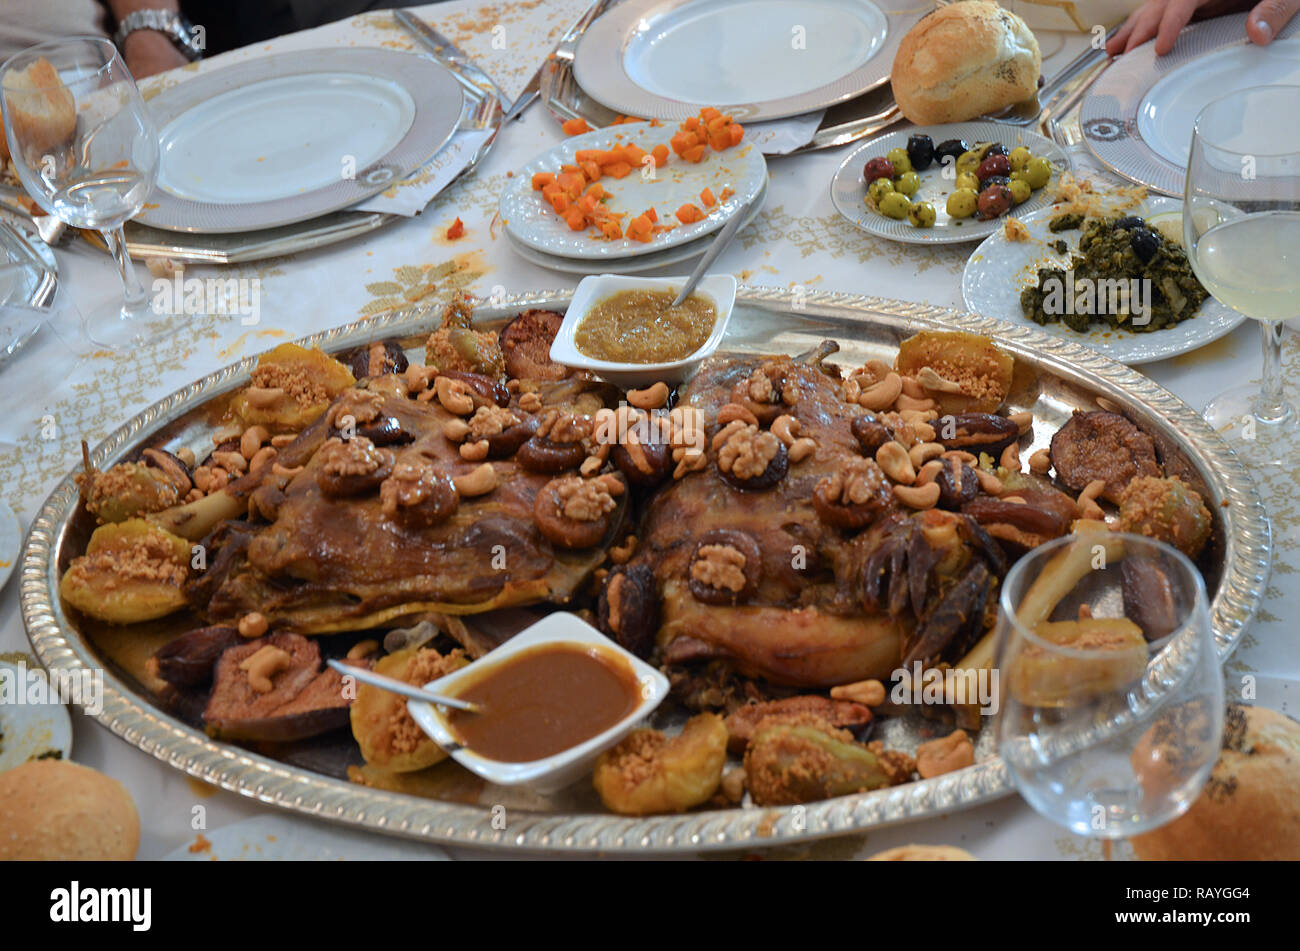 Moroccan dish with meat, plums and sesame seeds close up Stock Photo